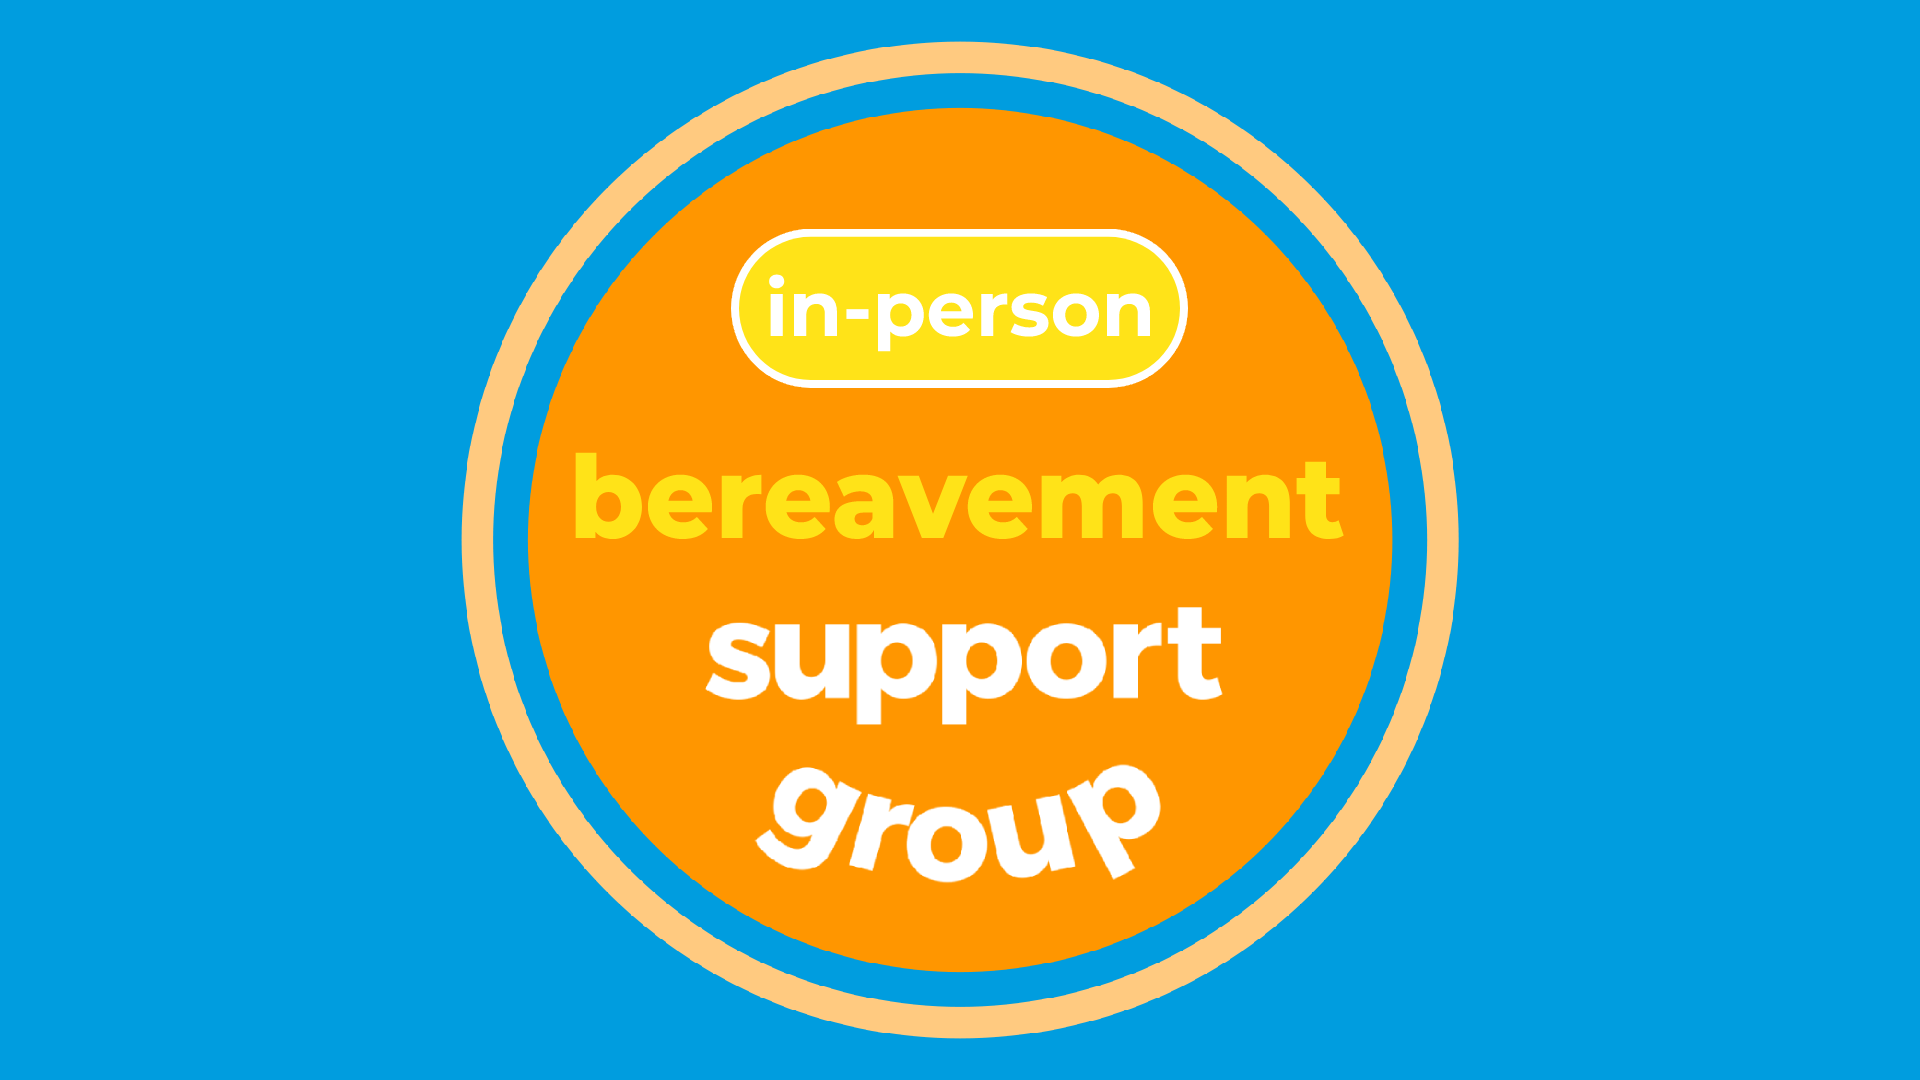 In-person Bereavement Support Group